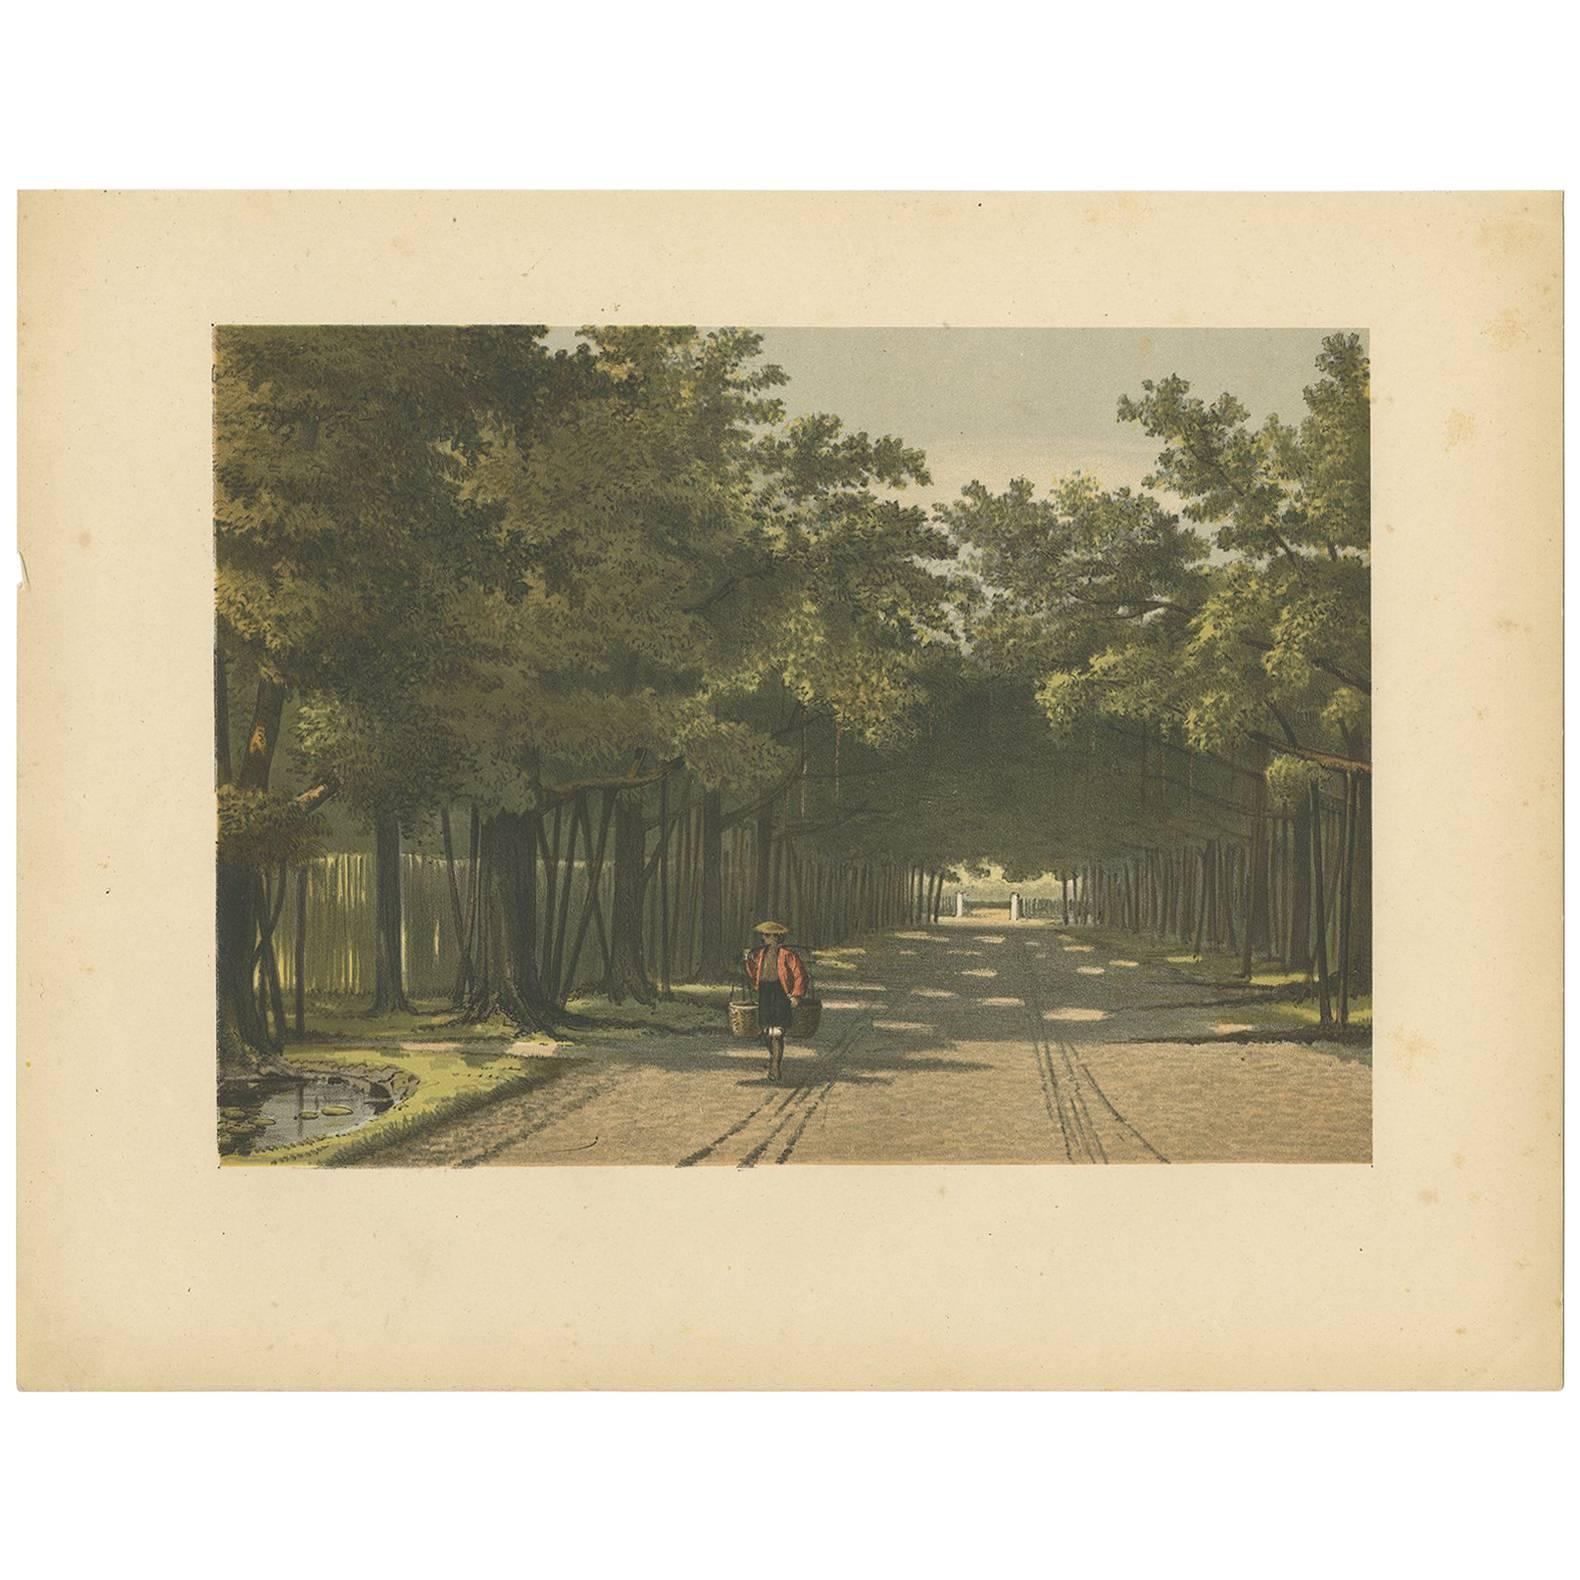 Antique Print of the Royal Arboretum in Batavia by M.T.H. Perelaer, 1888